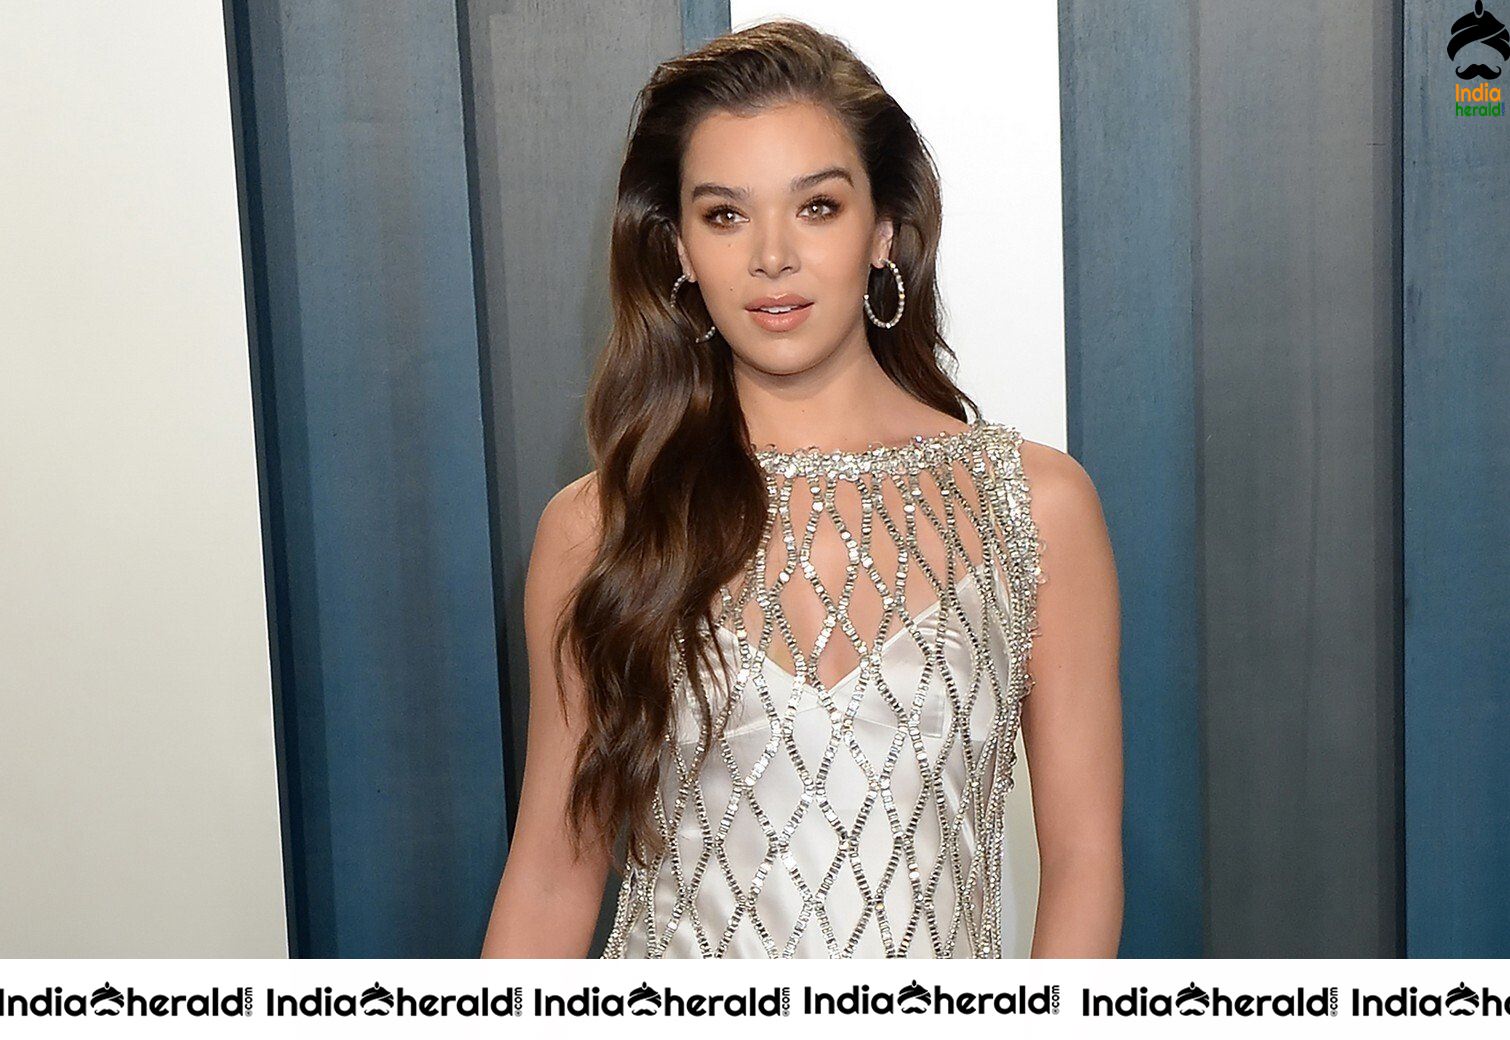 Hailee Steinfeld Looking Pretty at Oscar Party Dinner Event